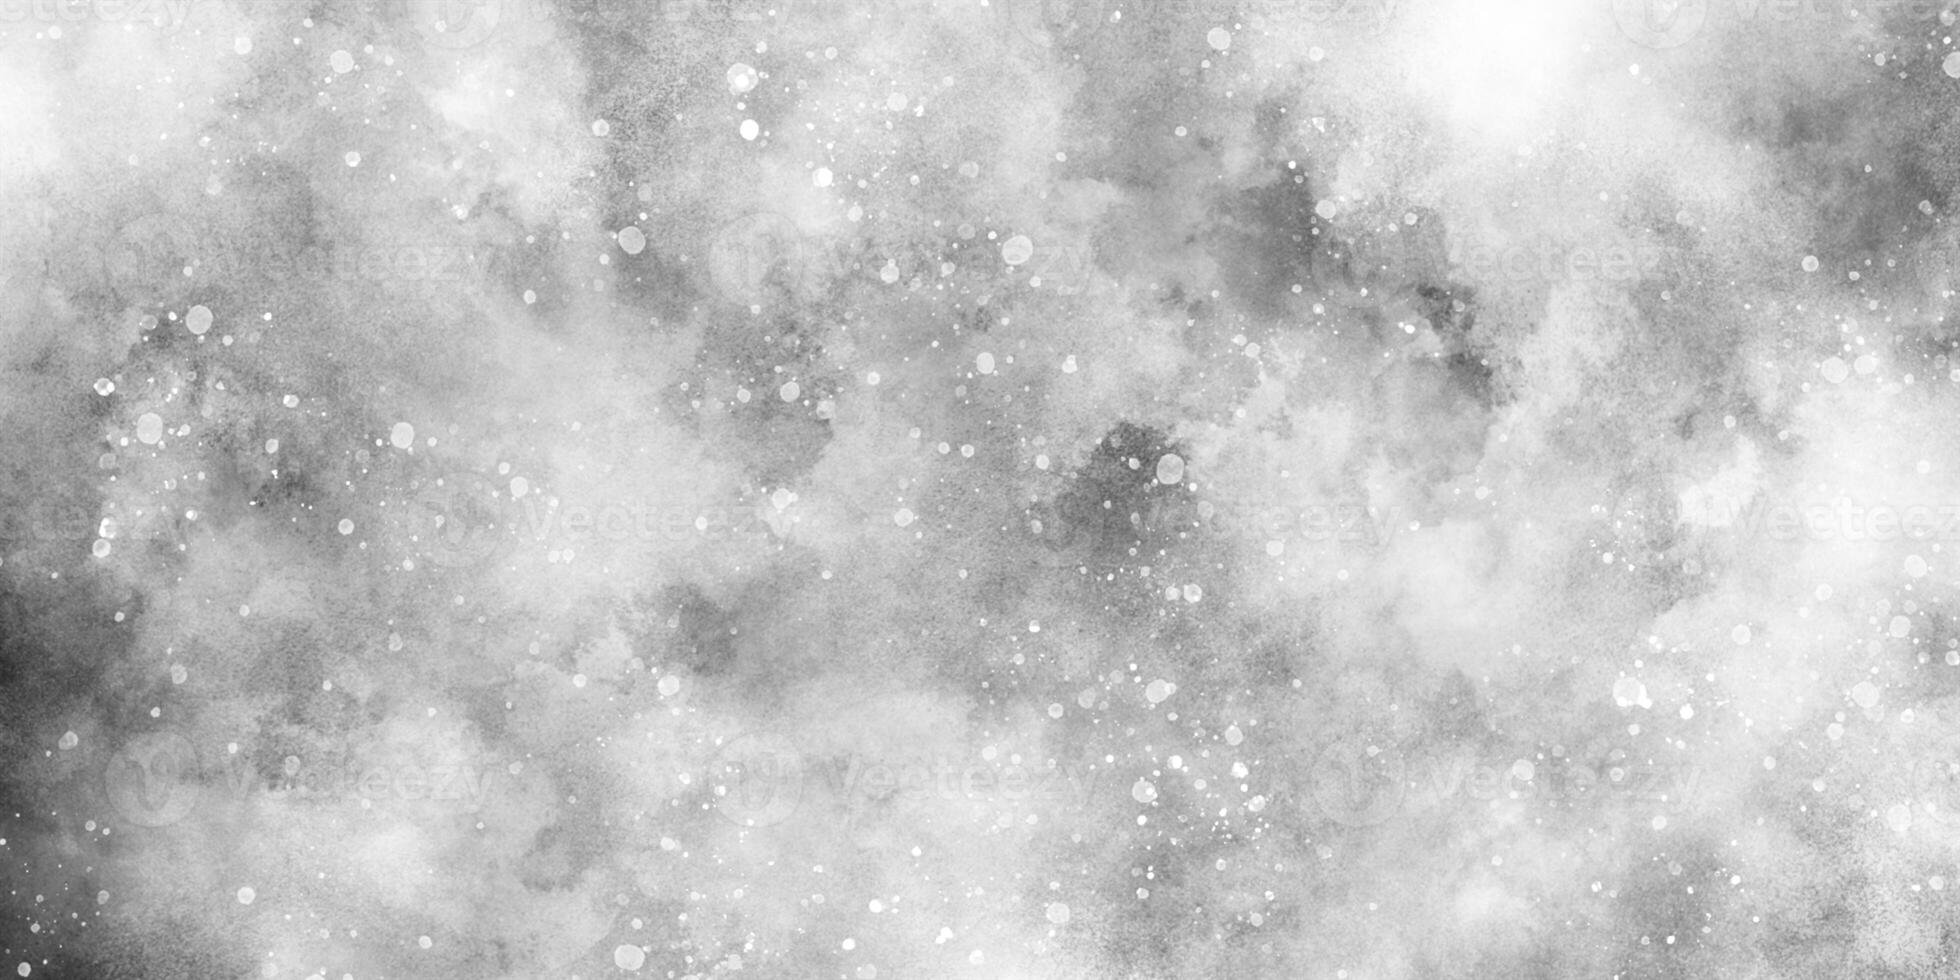 snow falling in the snow in the winter morning, sunshine or sparkling lights and glittering glow winter morning of snow falling background, abstract bokeh glitter background on blurred white. photo